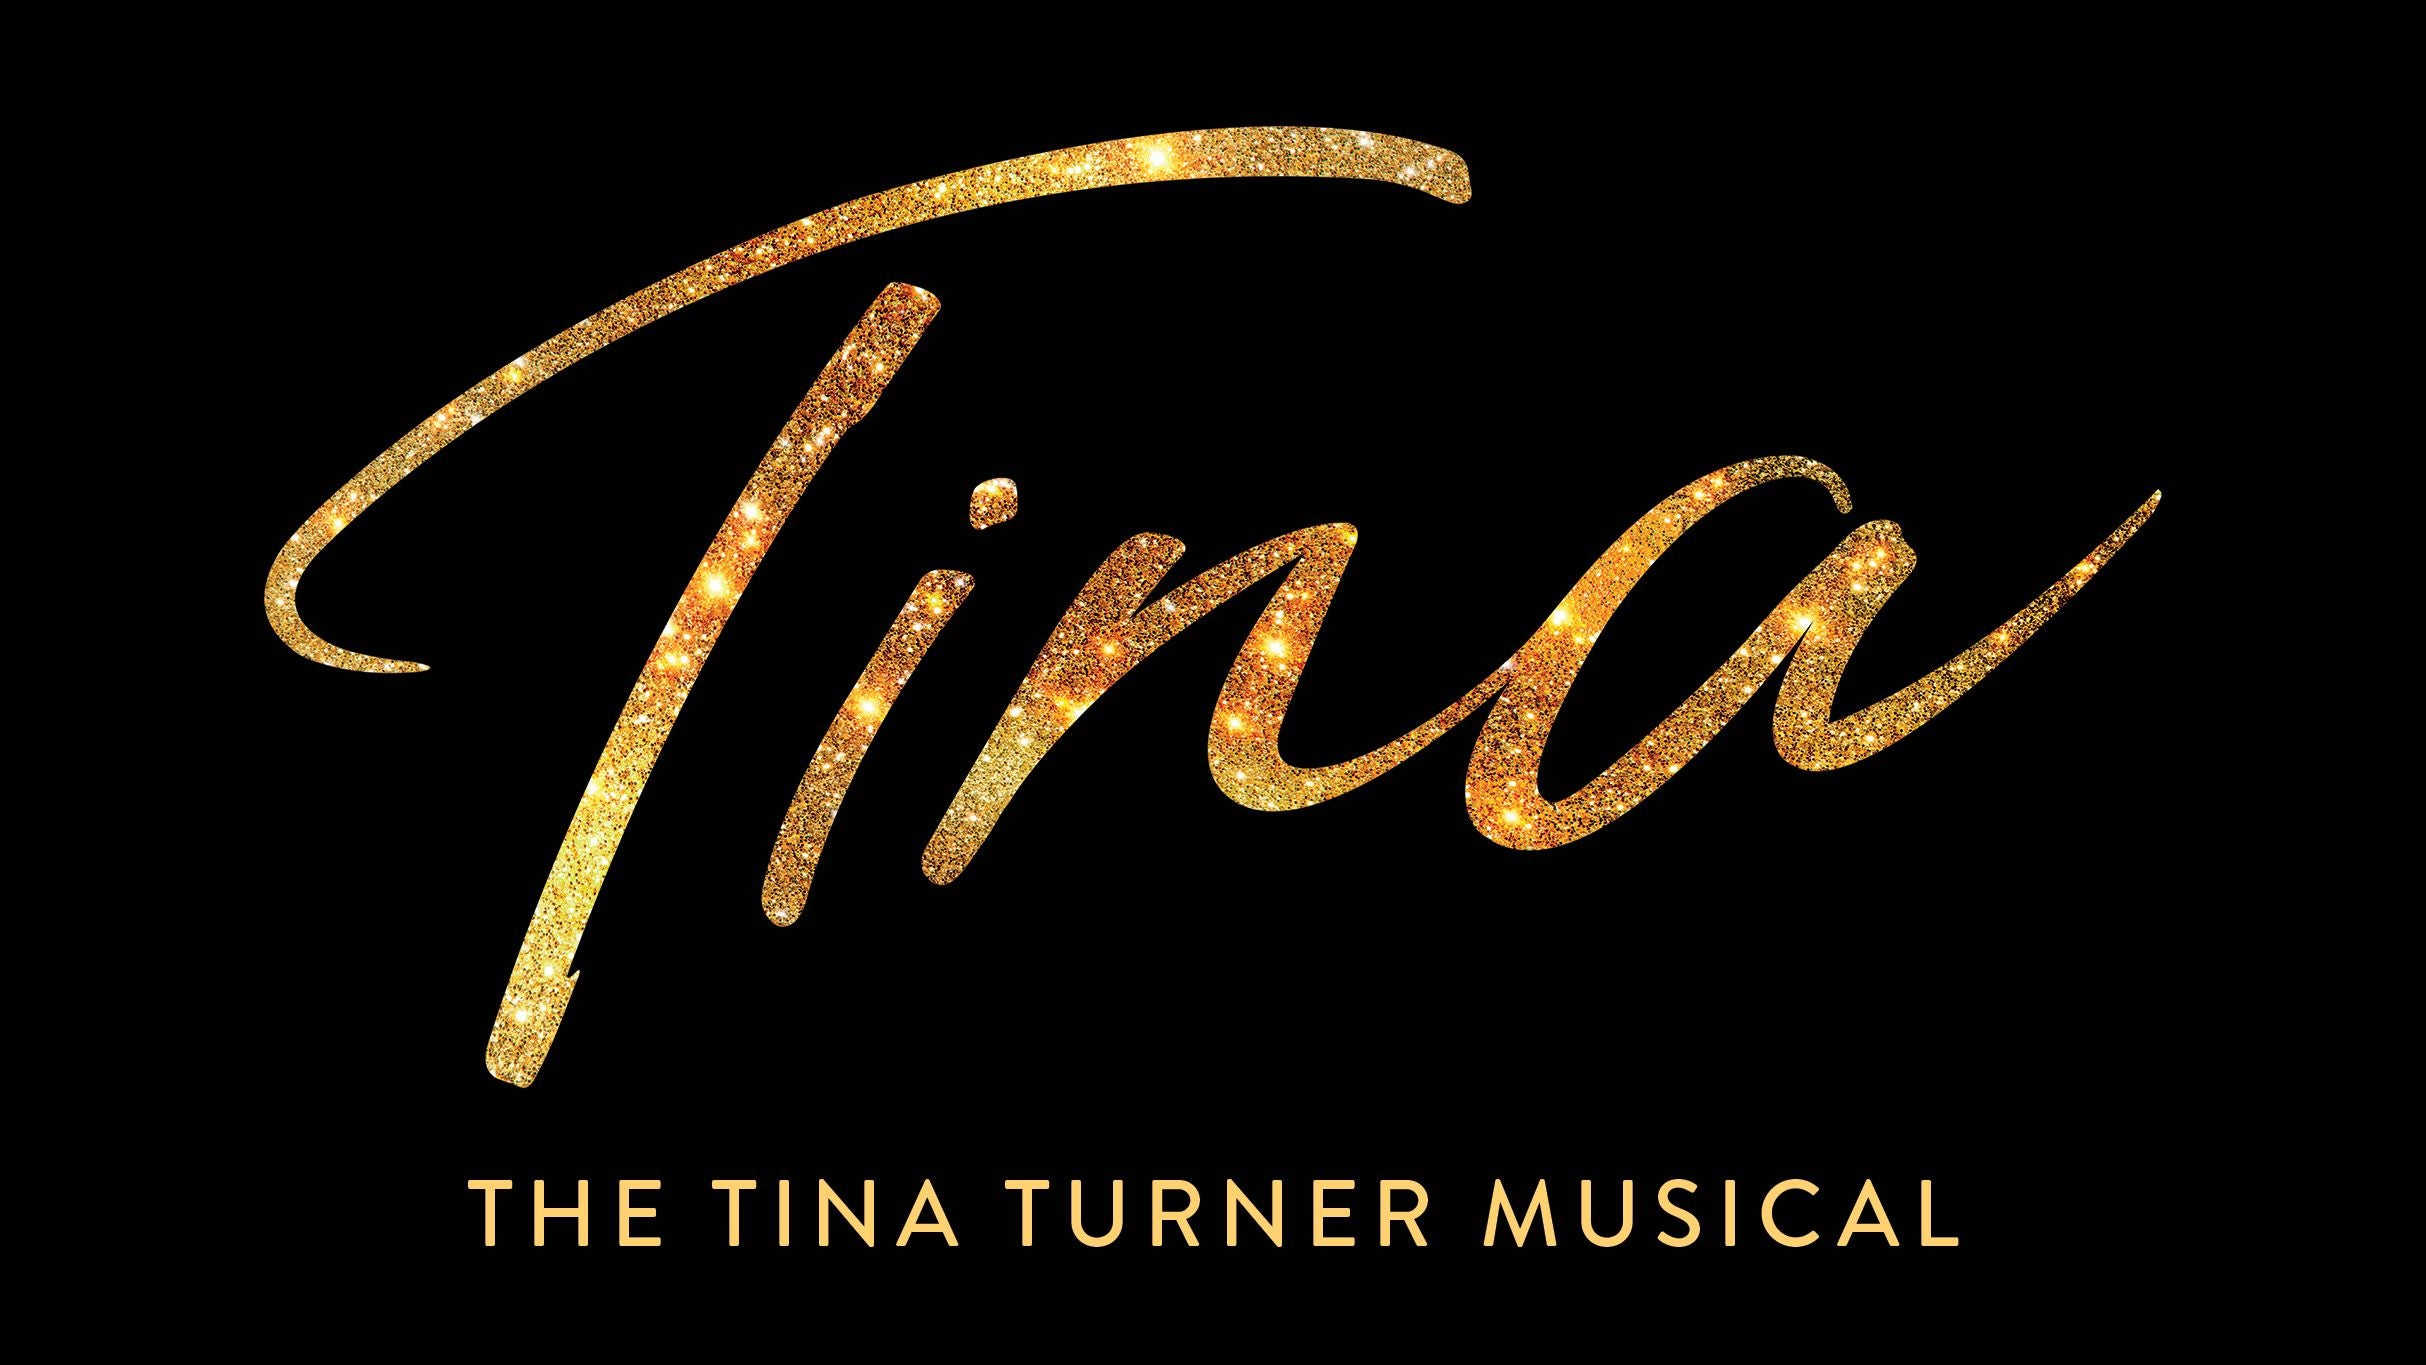 TINA - The Tina Turner Musical free presale listing for performance tickets in Houston, TX (Hobby Center)